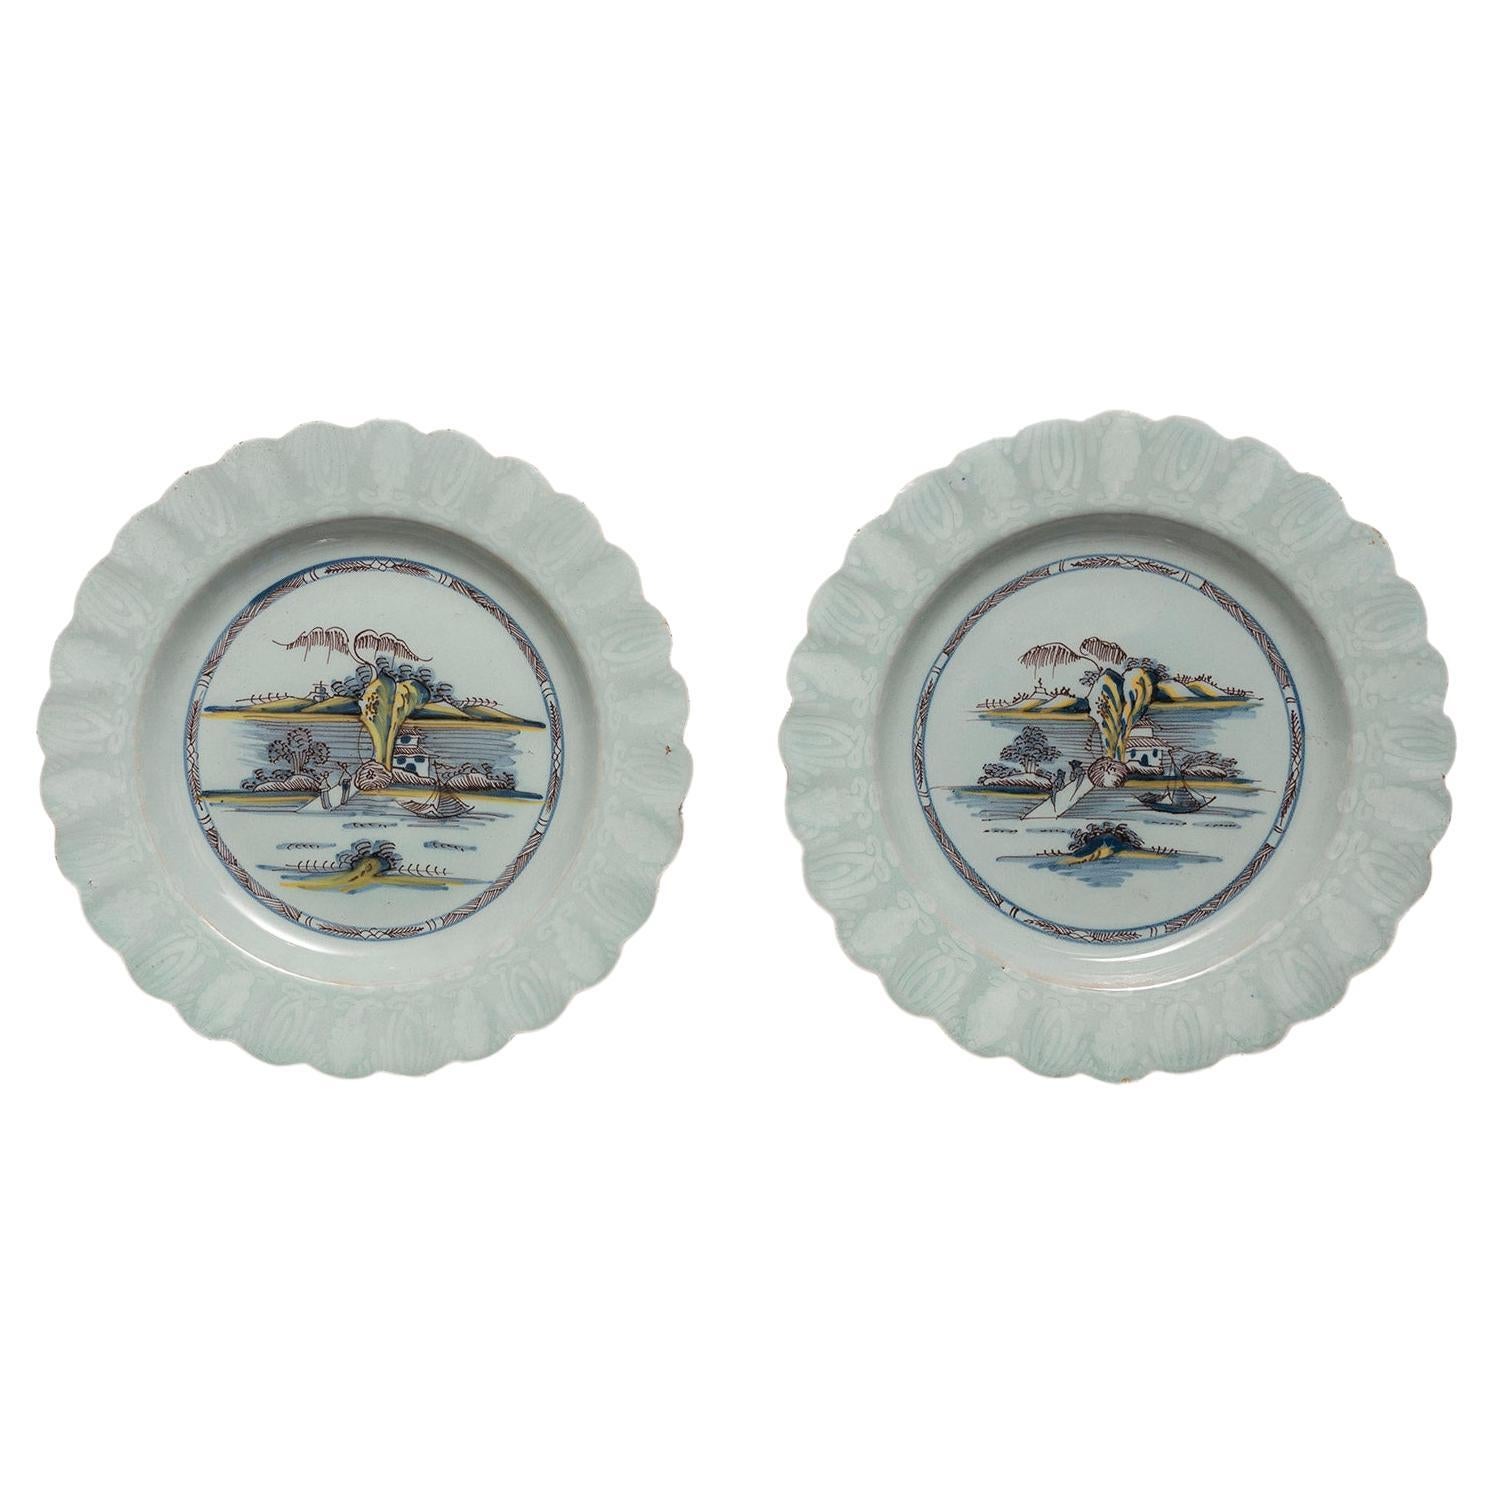 Plates Pair Biancosoprabianco Delft Redcliff Back Bristol Chinoiserie Polychrome For Sale